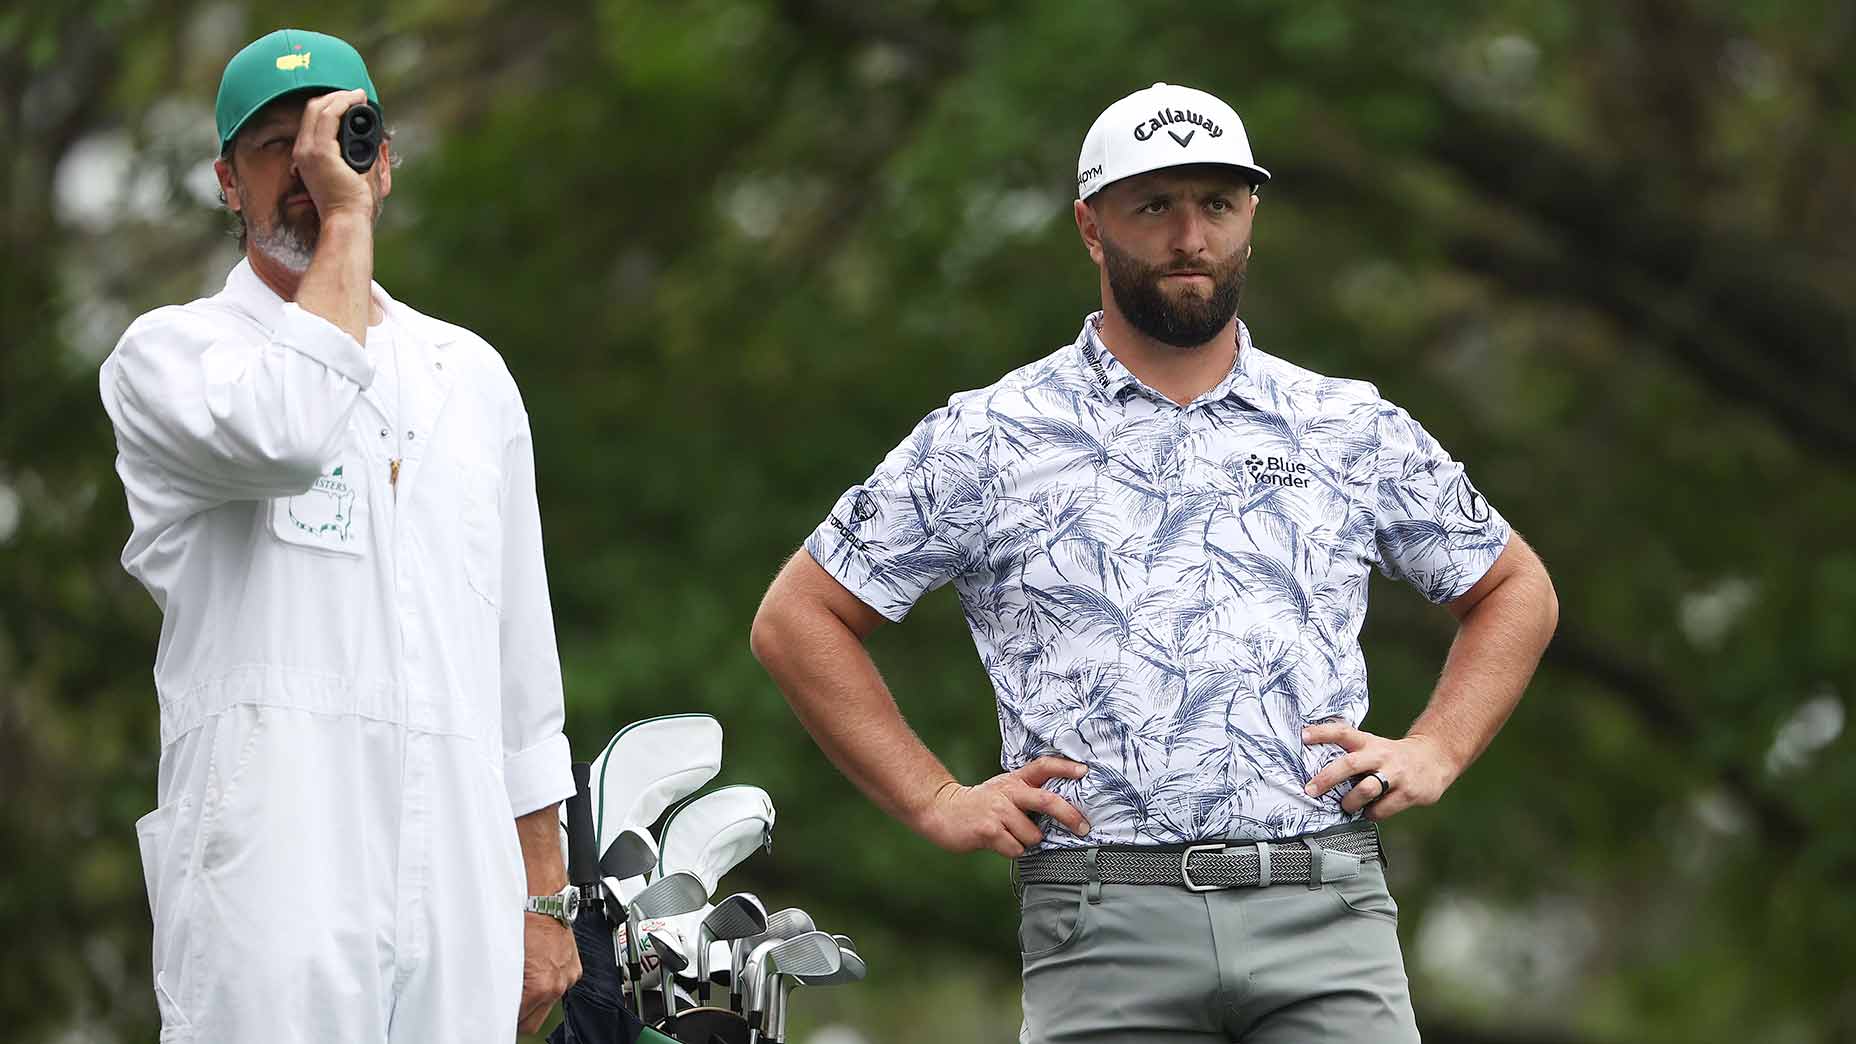 Masters picks to win and sleepers, according to our Subpar Podcast duo